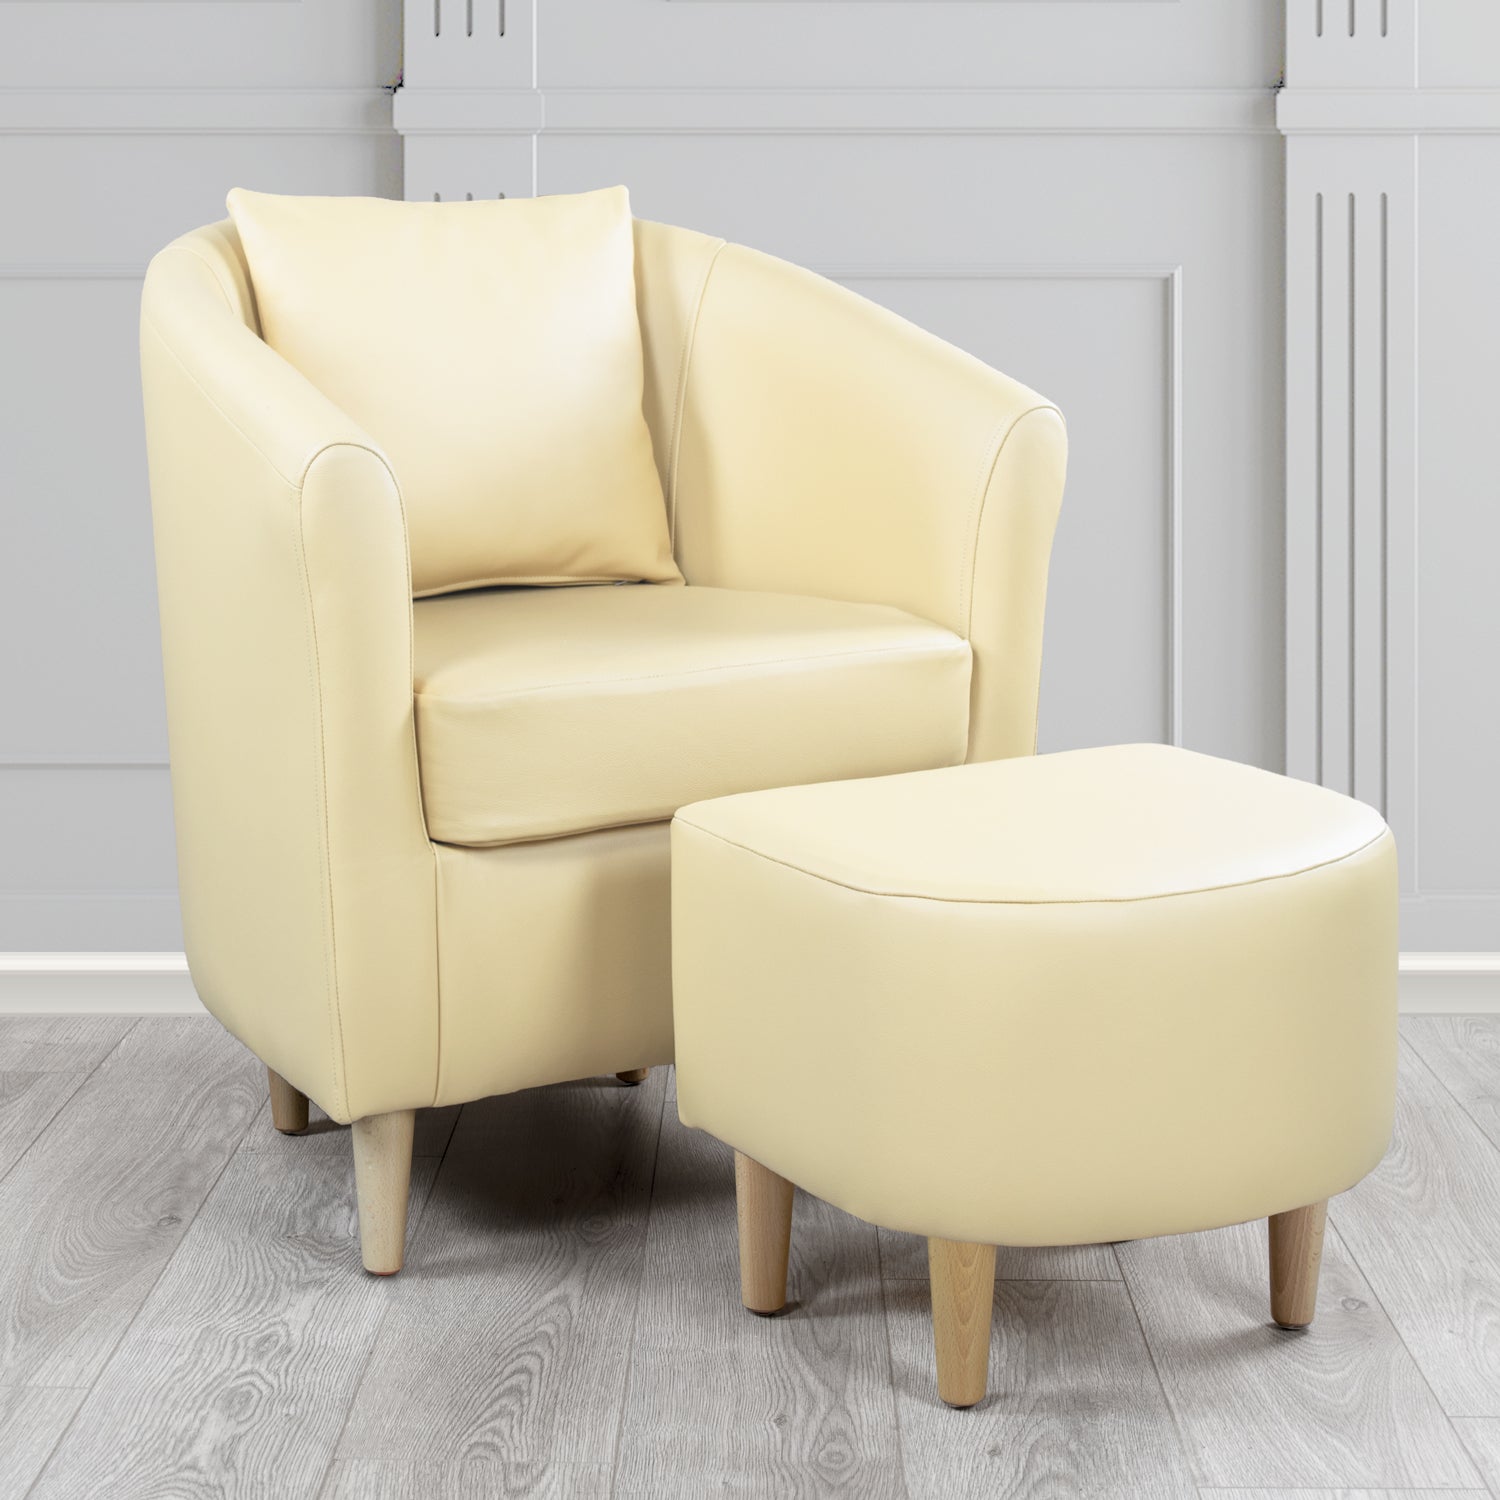 St Tropez Shelly Cream Crib 5 Genuine Leather Tub Chair & Footstool Set With Scatter Cushion (6619473149994)